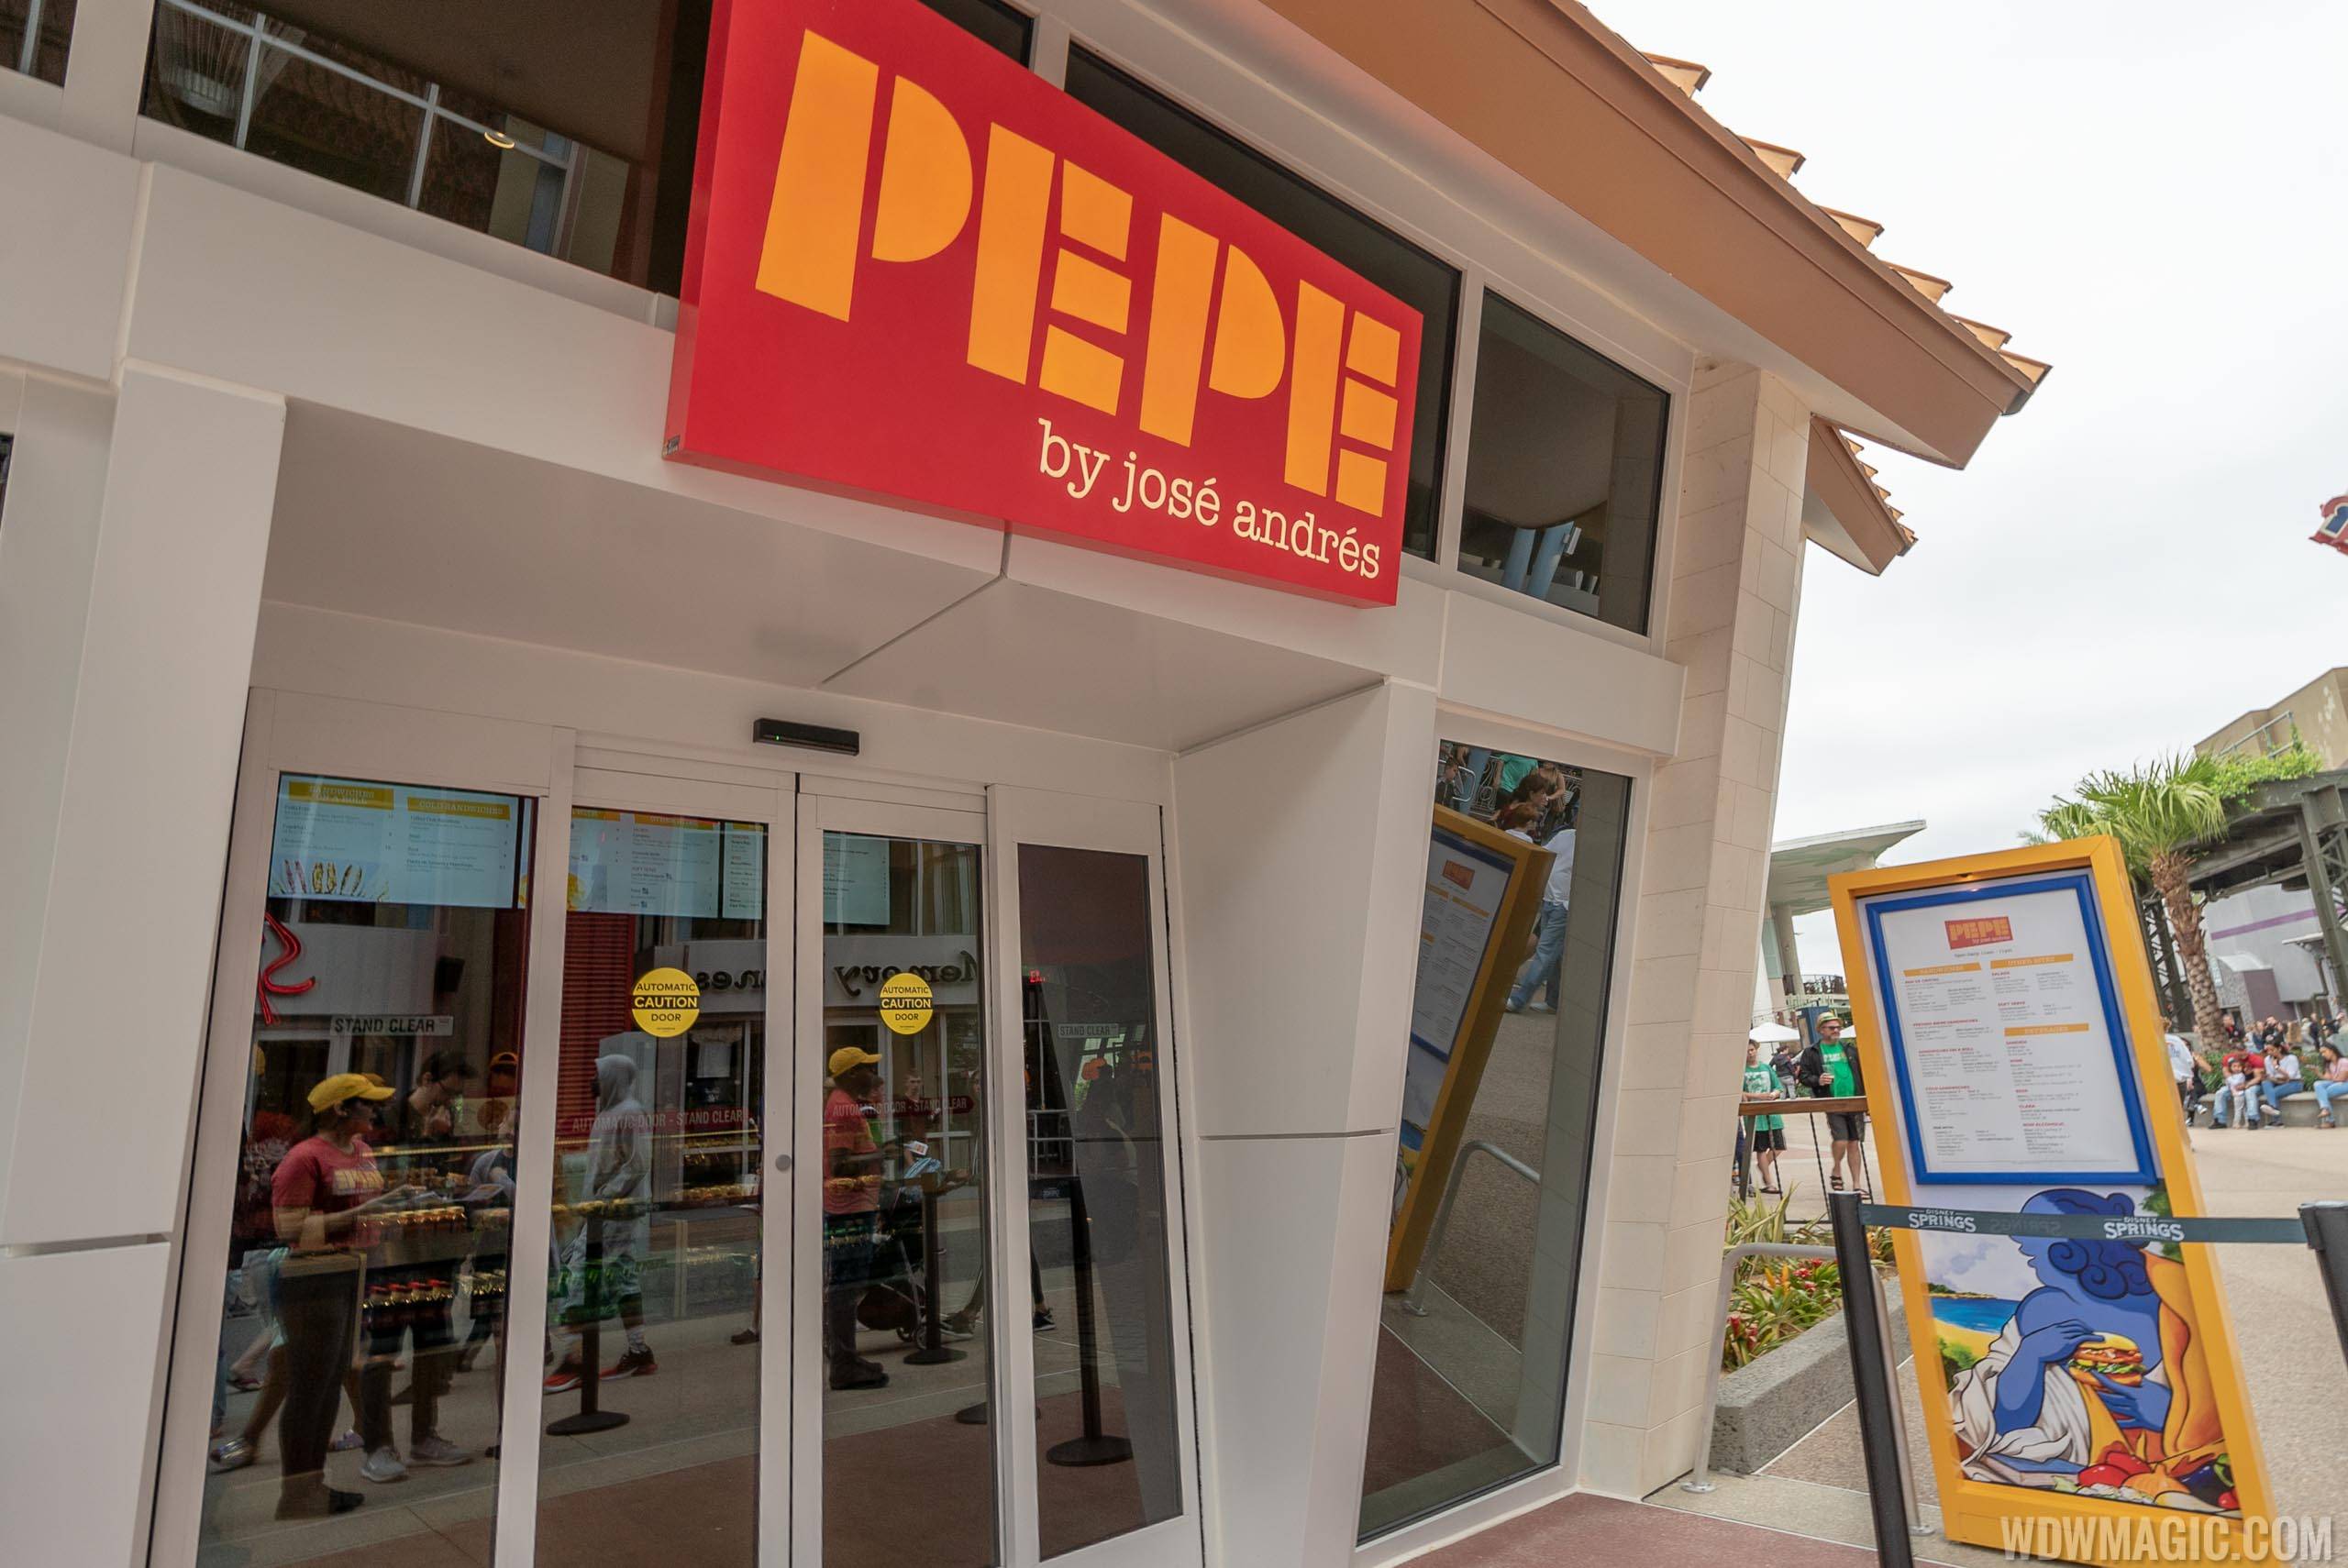 Get a great deal on Sangria at Pepe in Disney Springs tomorrow in celebration of National Sangria Day